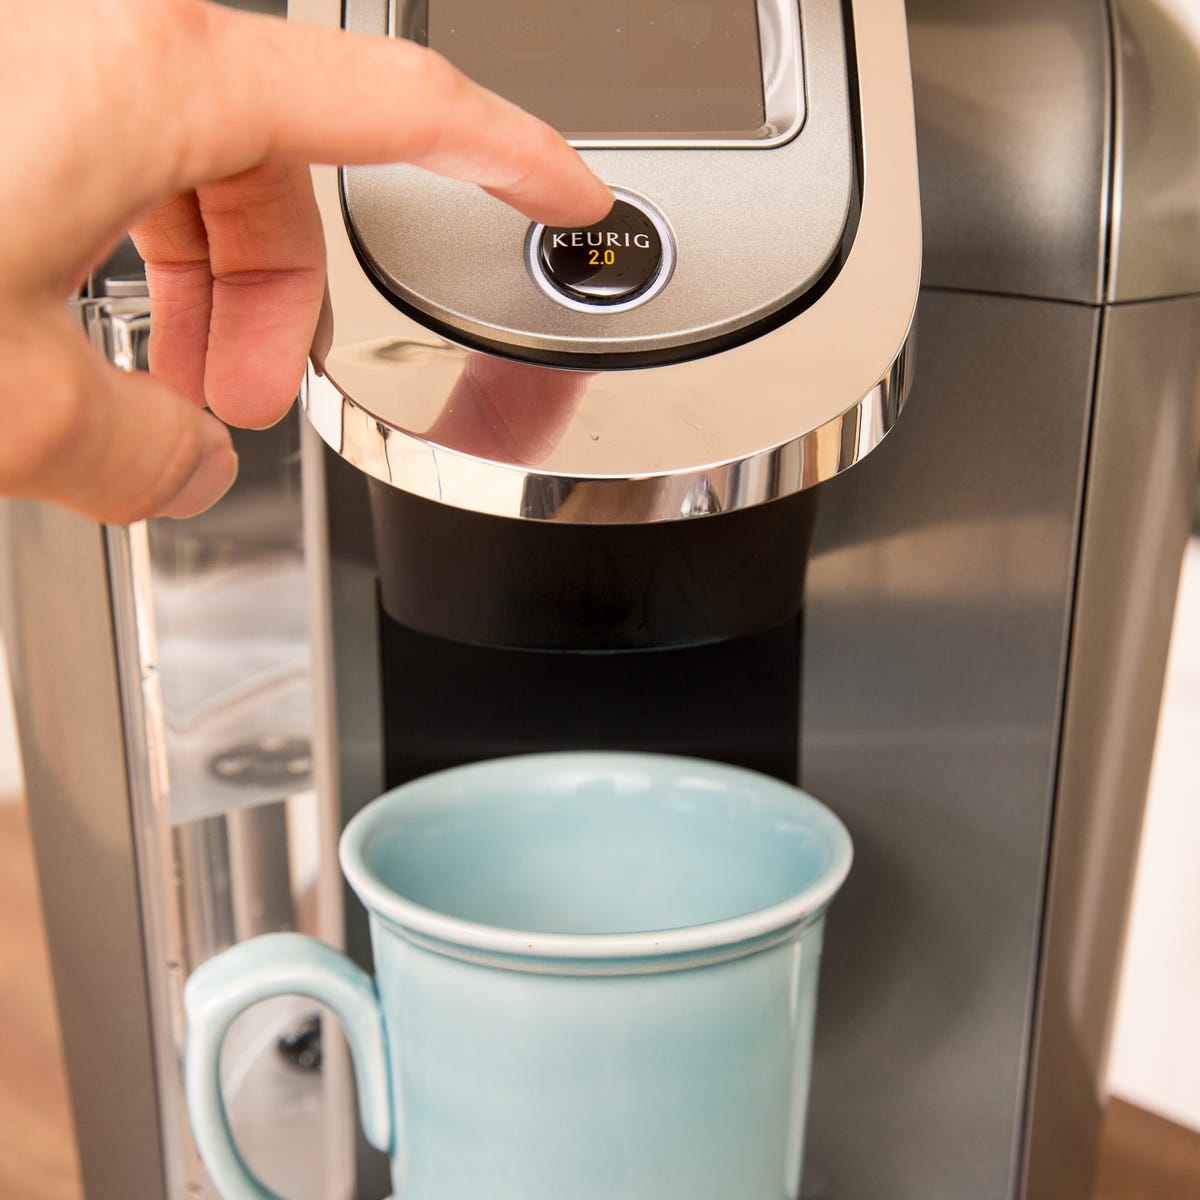 4 things to make with a Keurig beyond just coffee - CNET